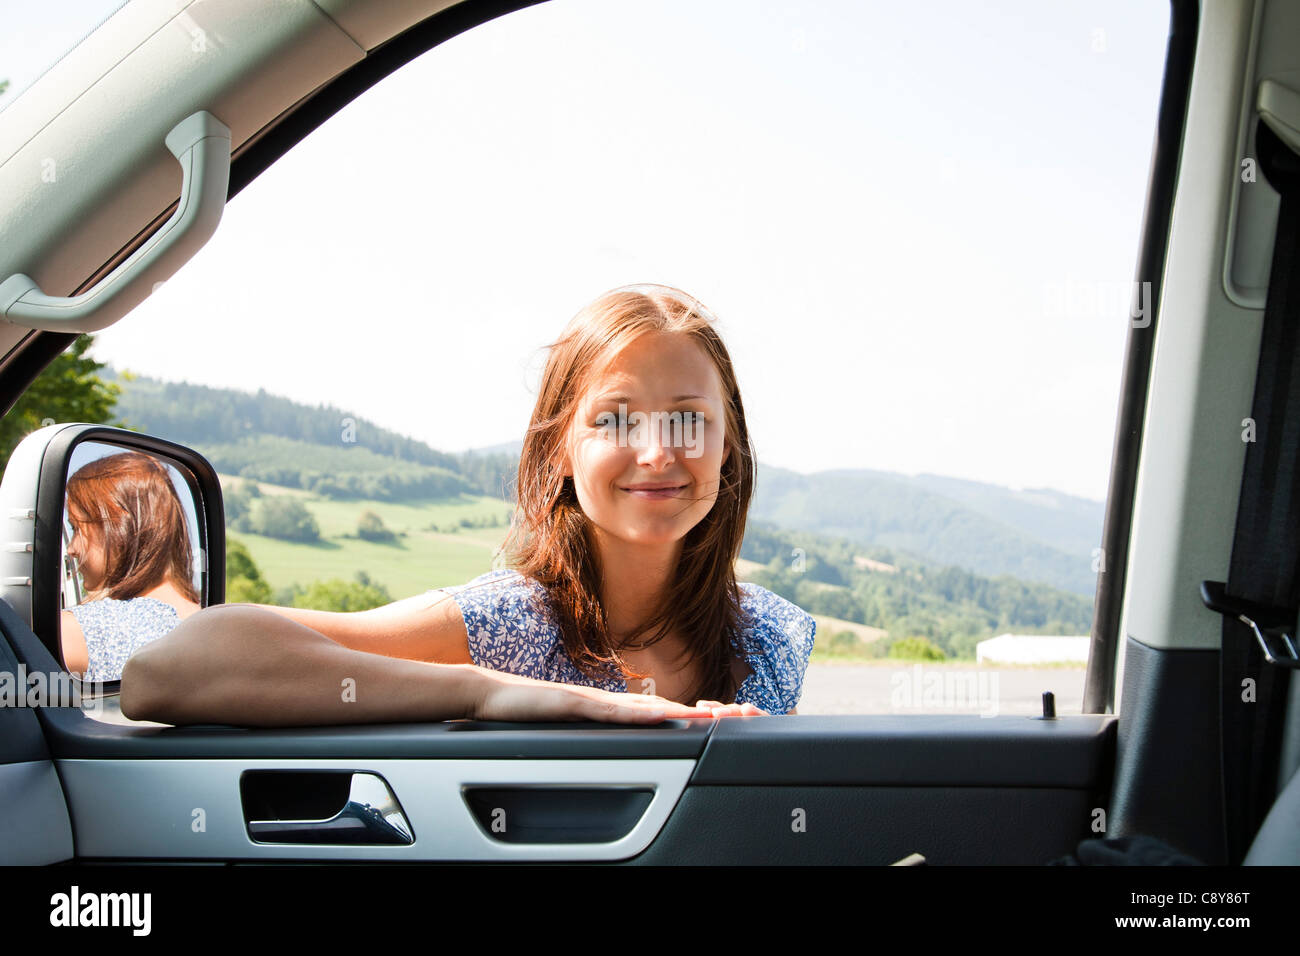 portrait of young woman looking through car window Stock Photo